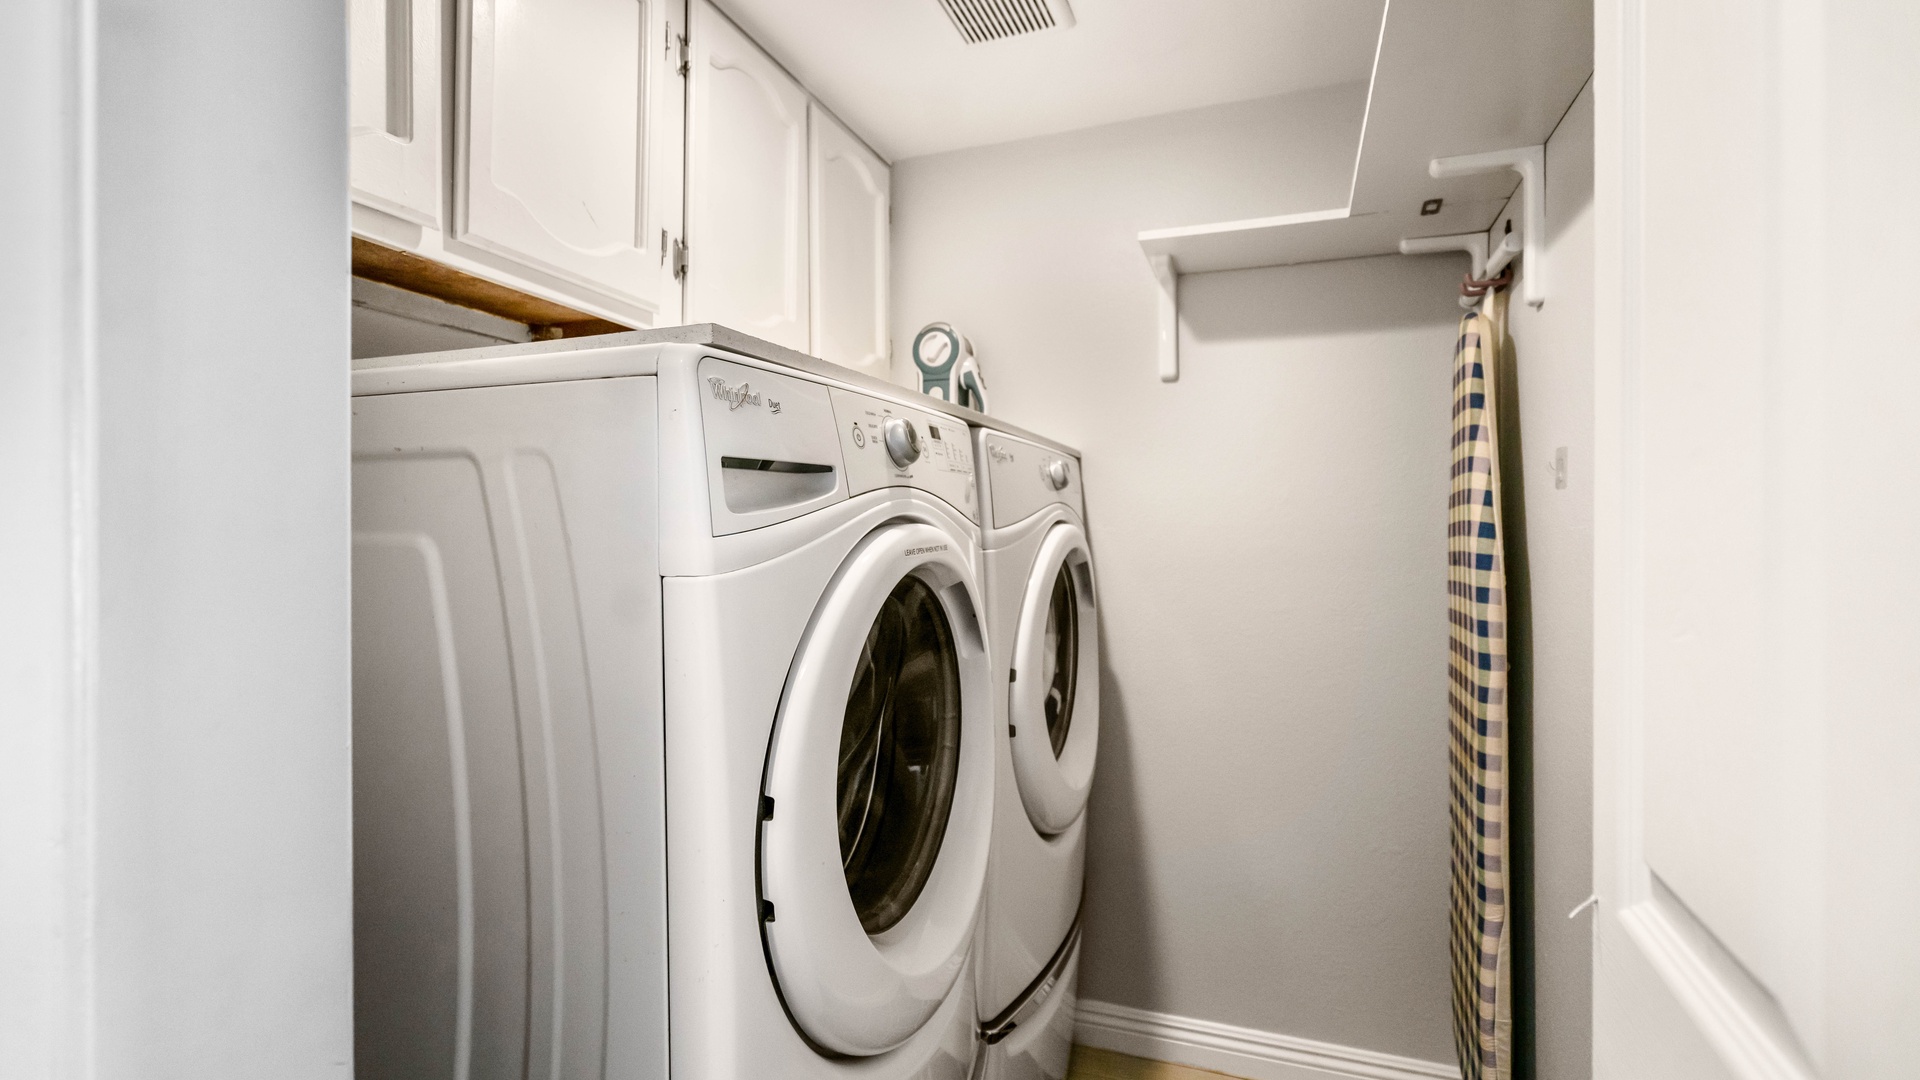 Washer and dryer with detergent available at no extra charge for your convenience.